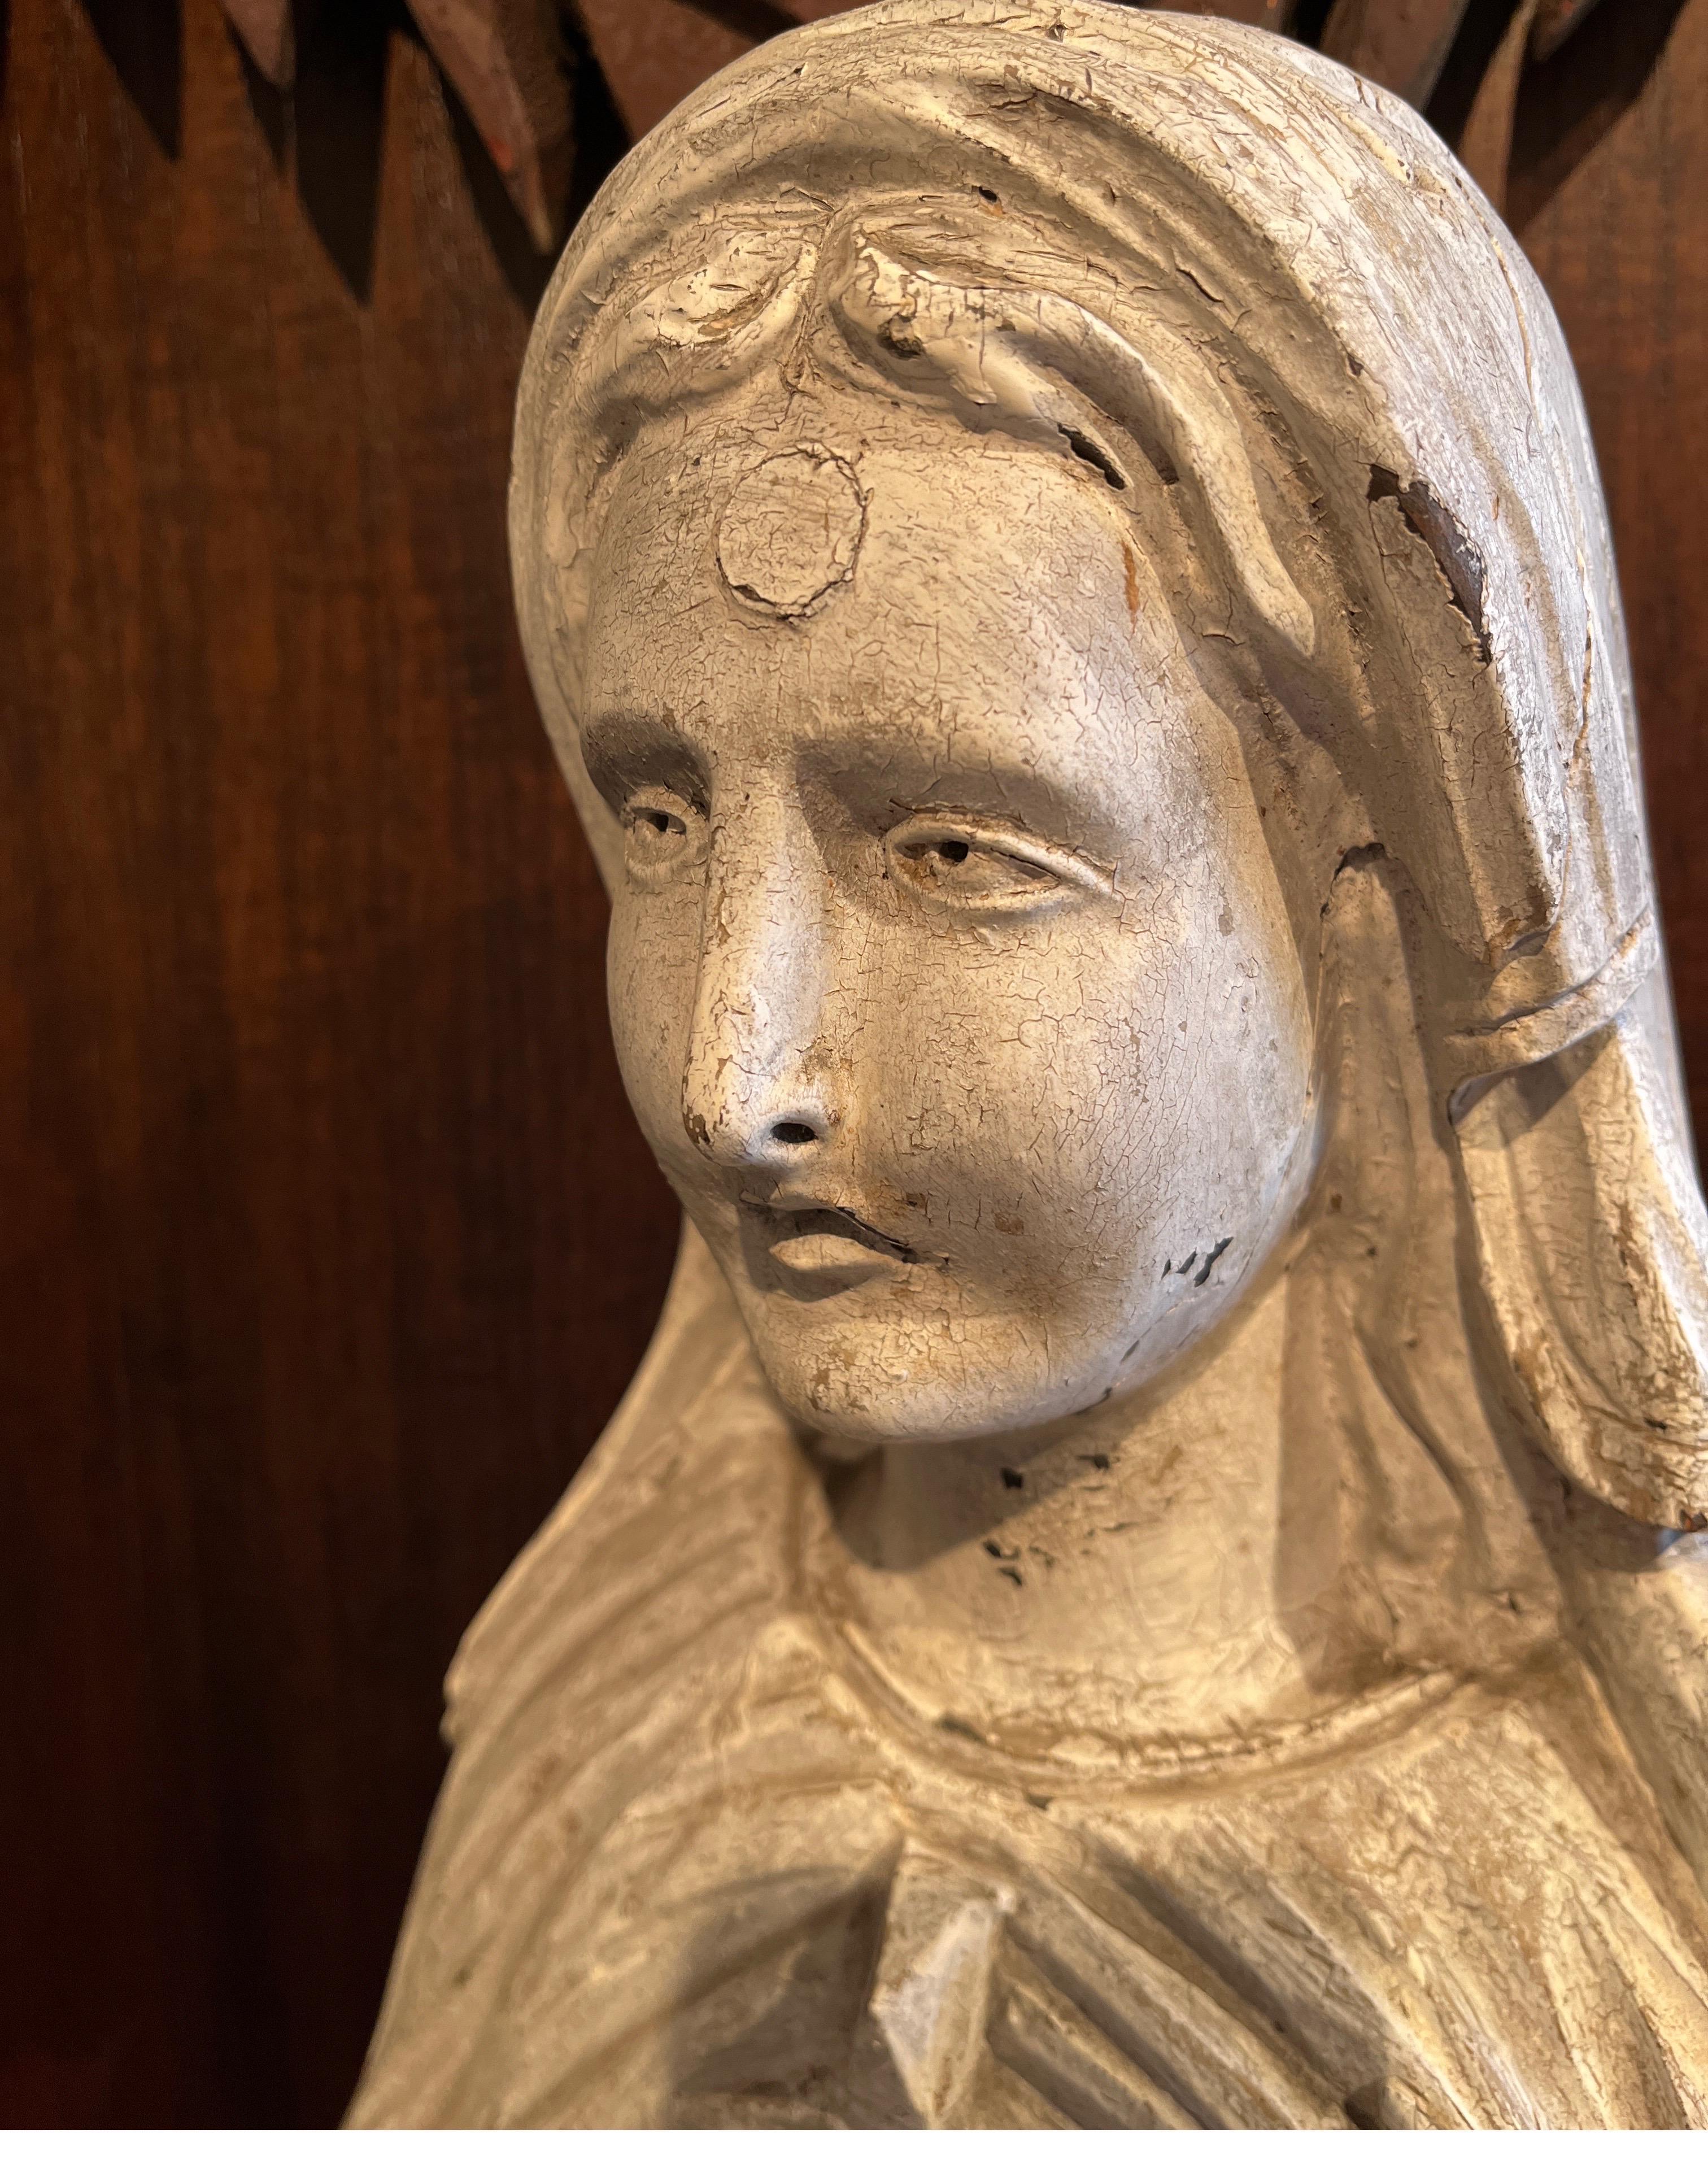 A tall, sensitively sculpted antique wood figure of The Madonna. Standing almost three feet high, the exquisitely carved face of Mary, surrounded by graceful flowing robes and head covering, conveys an almost ineffable sense of spirituality and